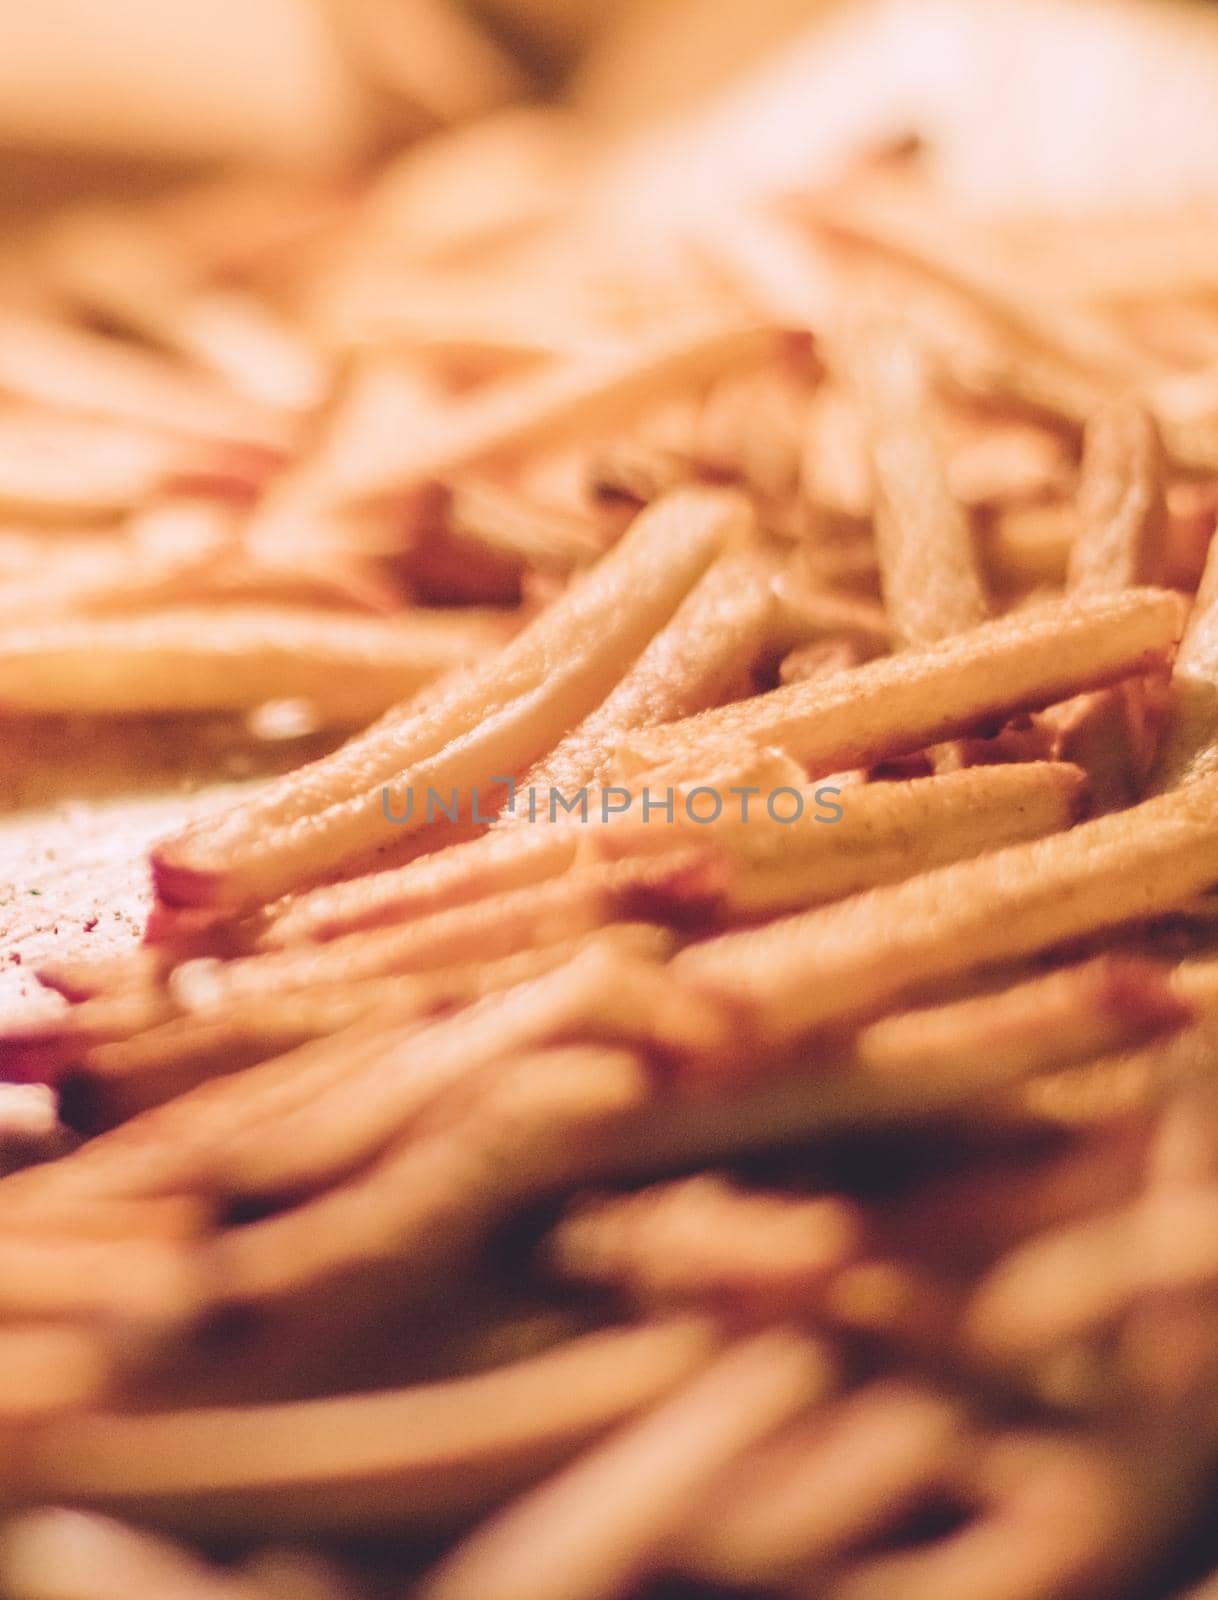 just cooked french fries in the oven - rustic food and homemade cooking styled concept, elegant visuals